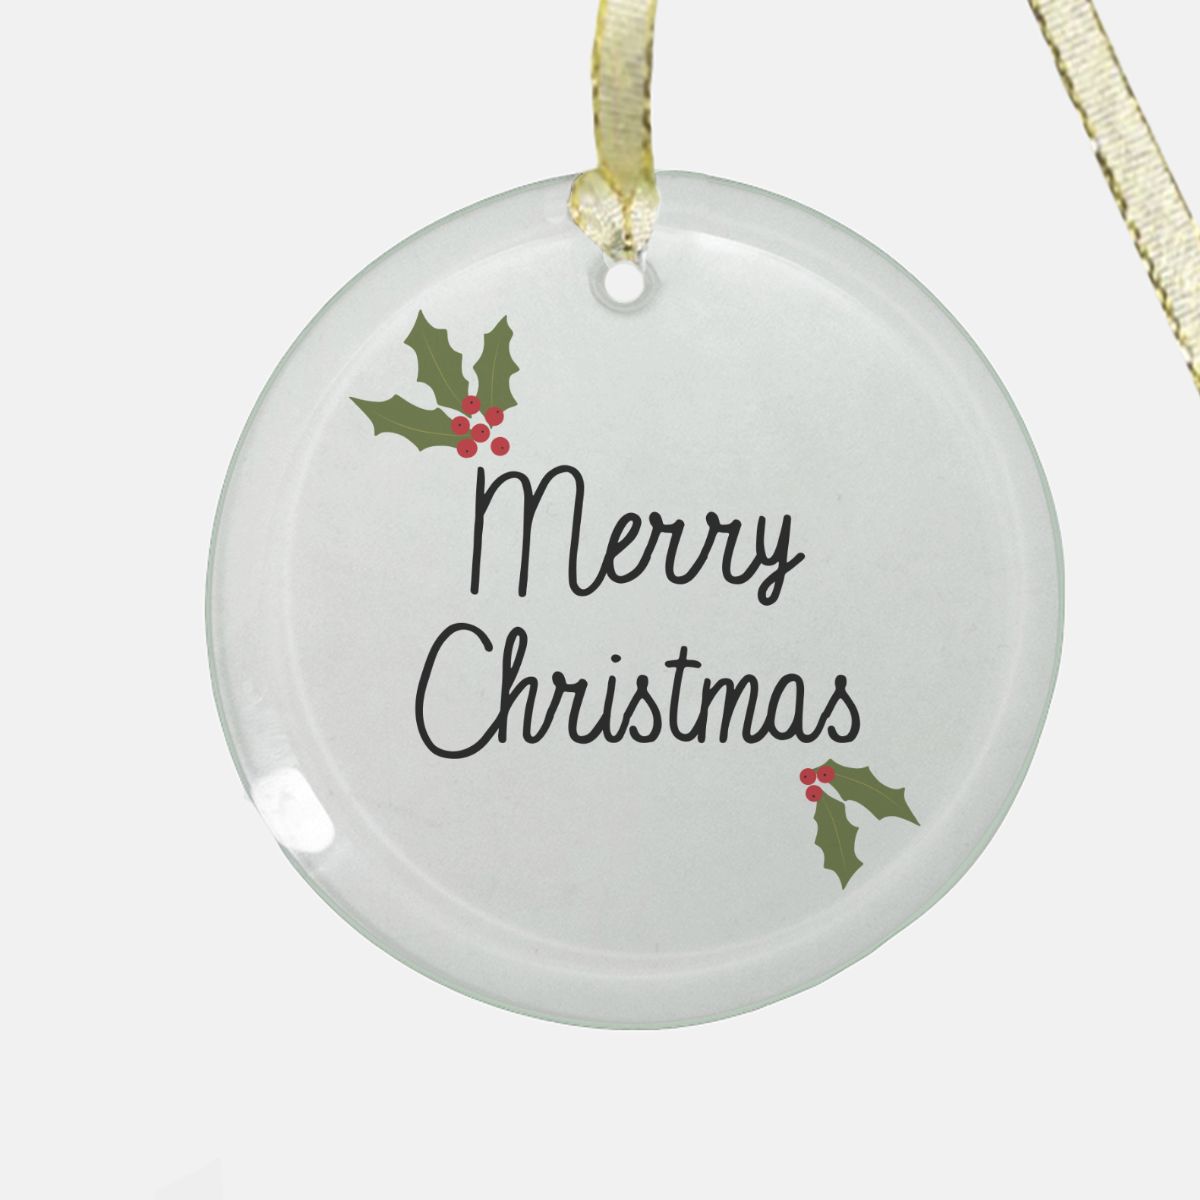 Round Clear Glass Holiday Ornament - Holly Merry Christmas